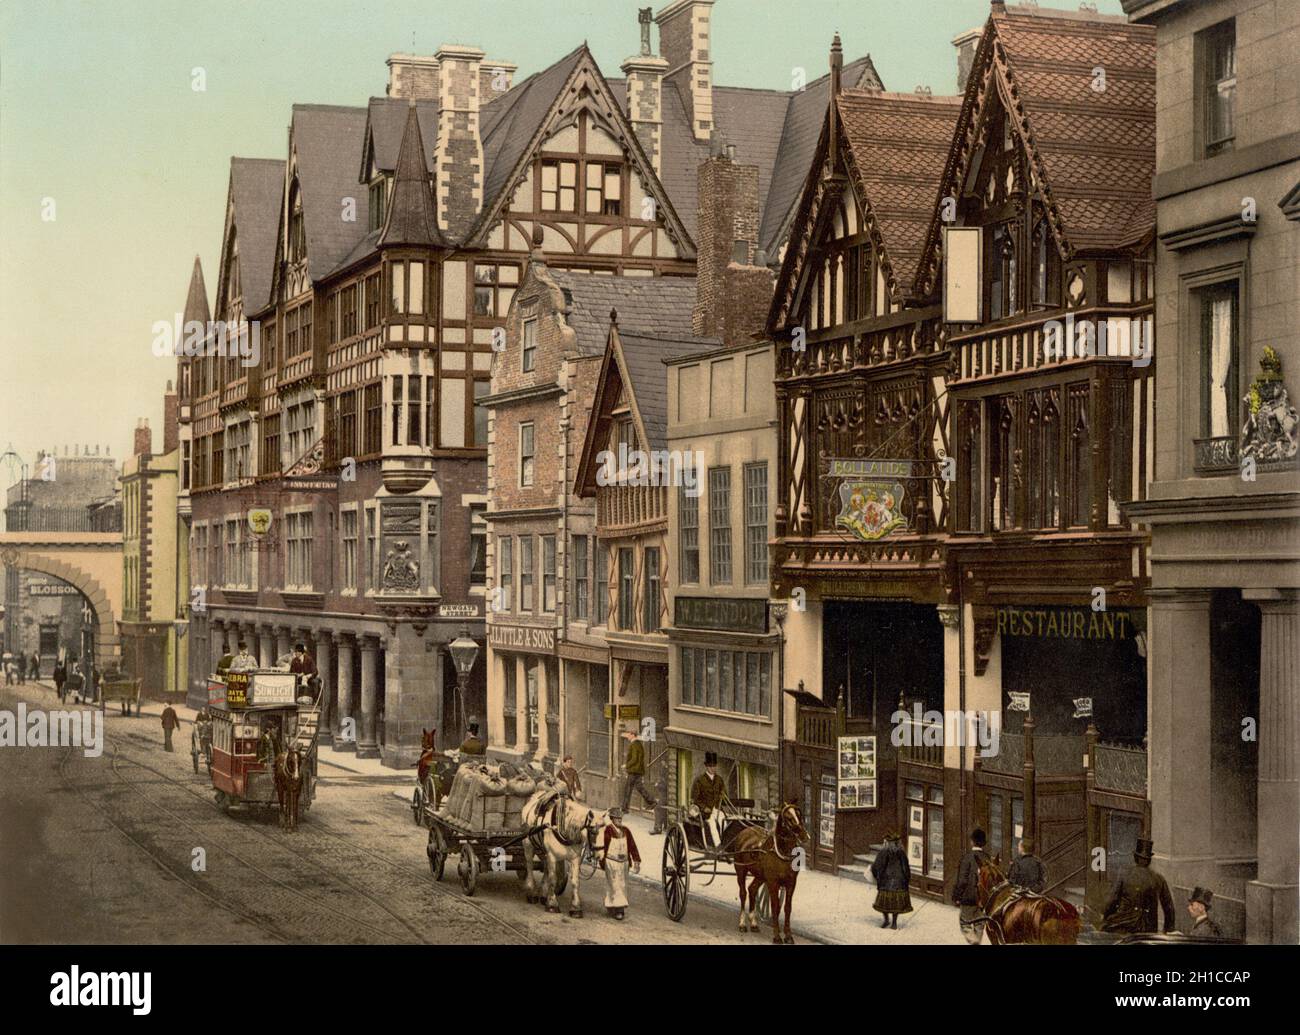 Vintage photochrome colour photo circa 1890 of Eastgate Street in Chester an historic town in England dating back to the medieval period.  The view includes the Tudor period buildings and rows in the city centre also the Grosvenor Hotel.  A horse drawn tram operated by the Chester Tramways Company can be seen Stock Photo